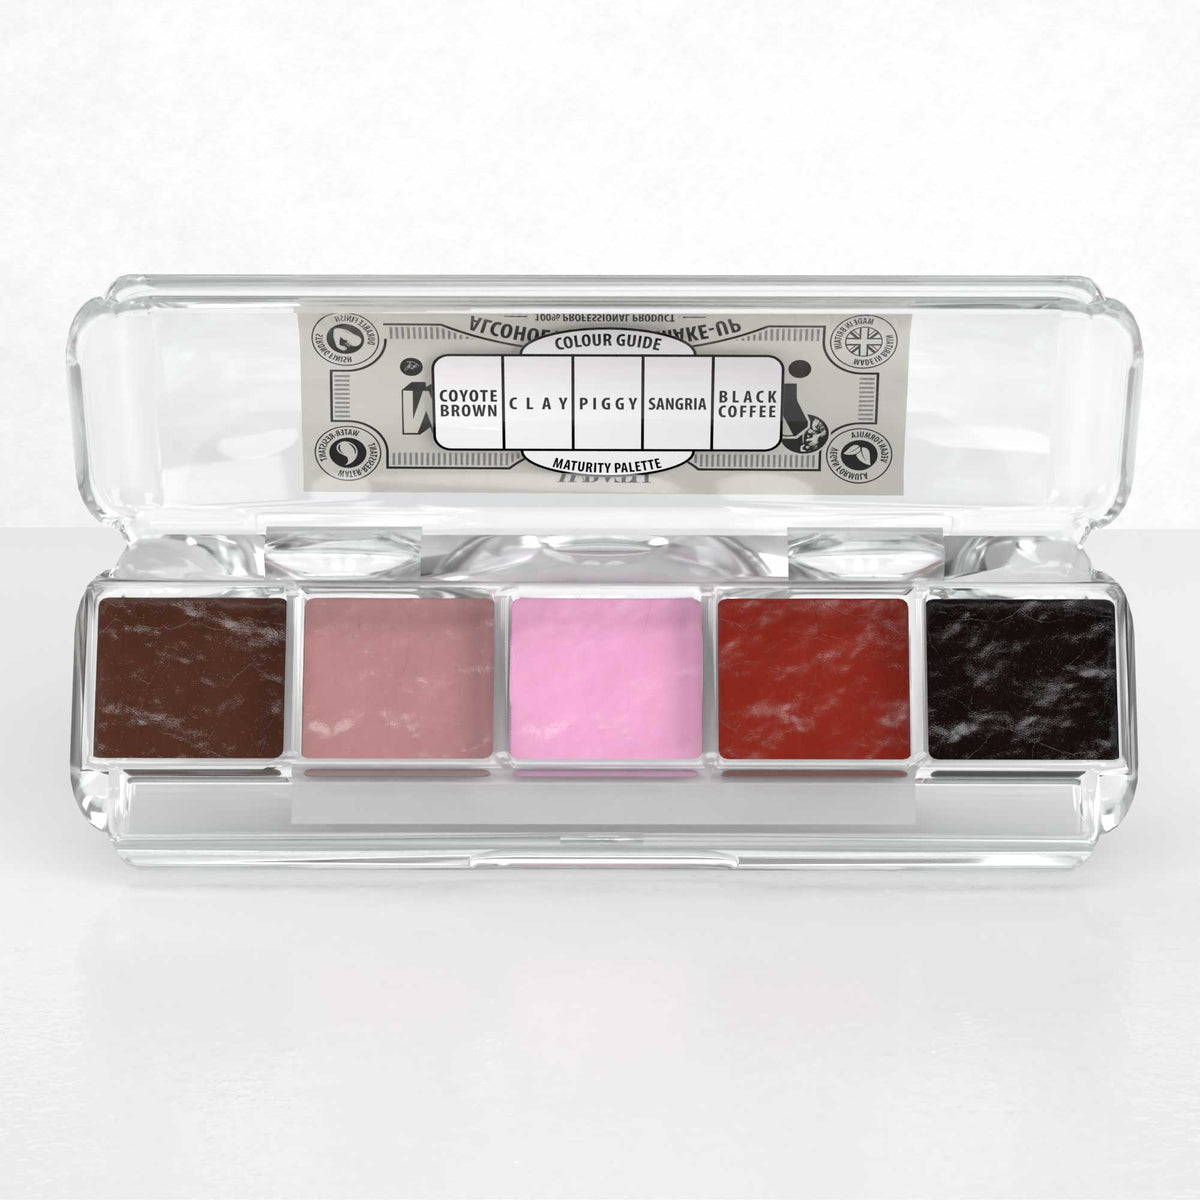 WRATH Alcohol Activated Make-up 5 Palette - Maturity